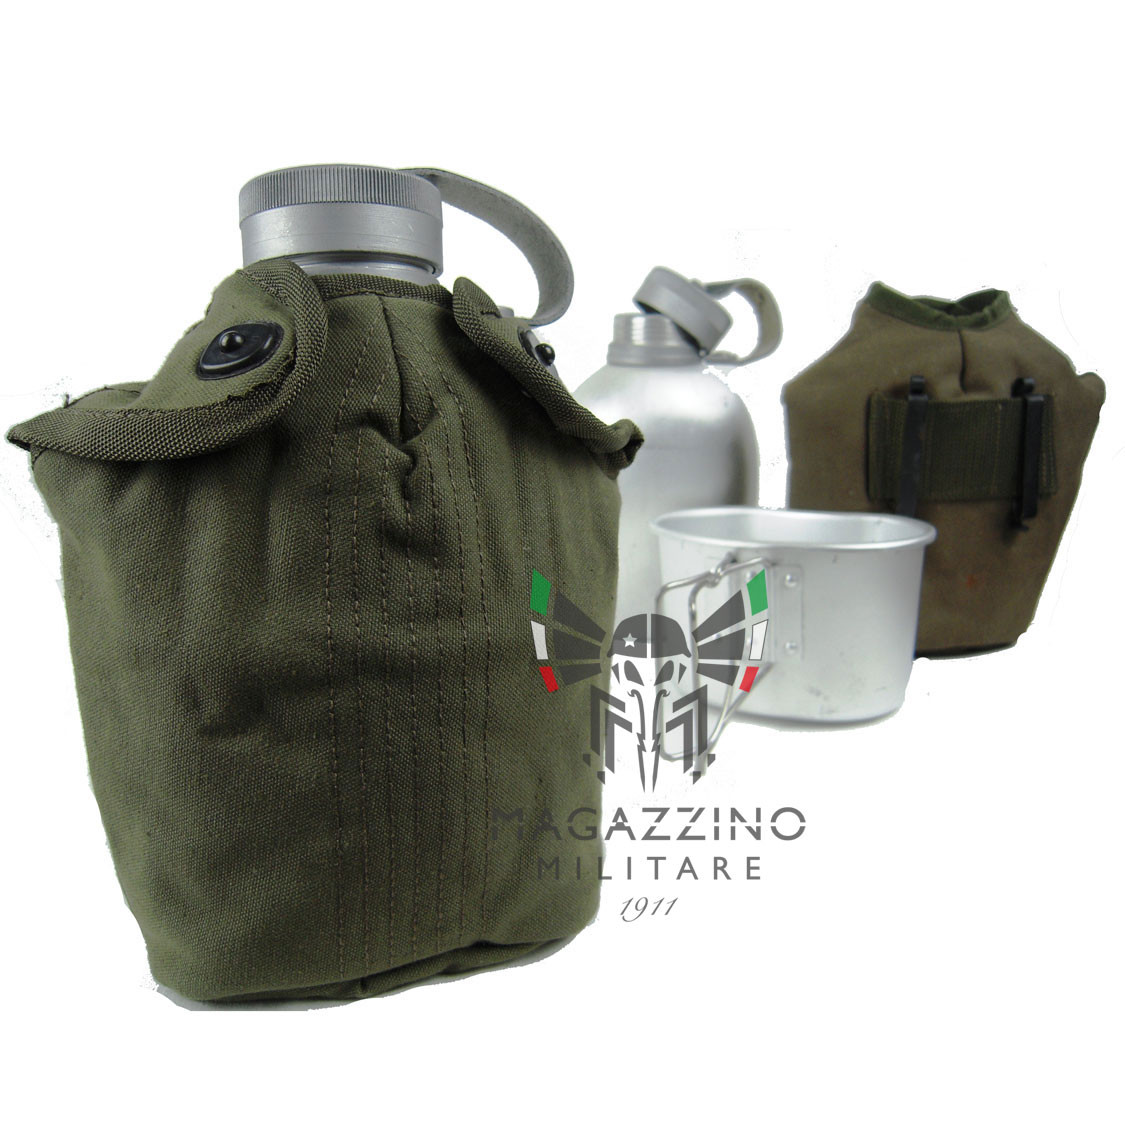 Original Italian Army Canteen with thermo lining and Complete NEW *